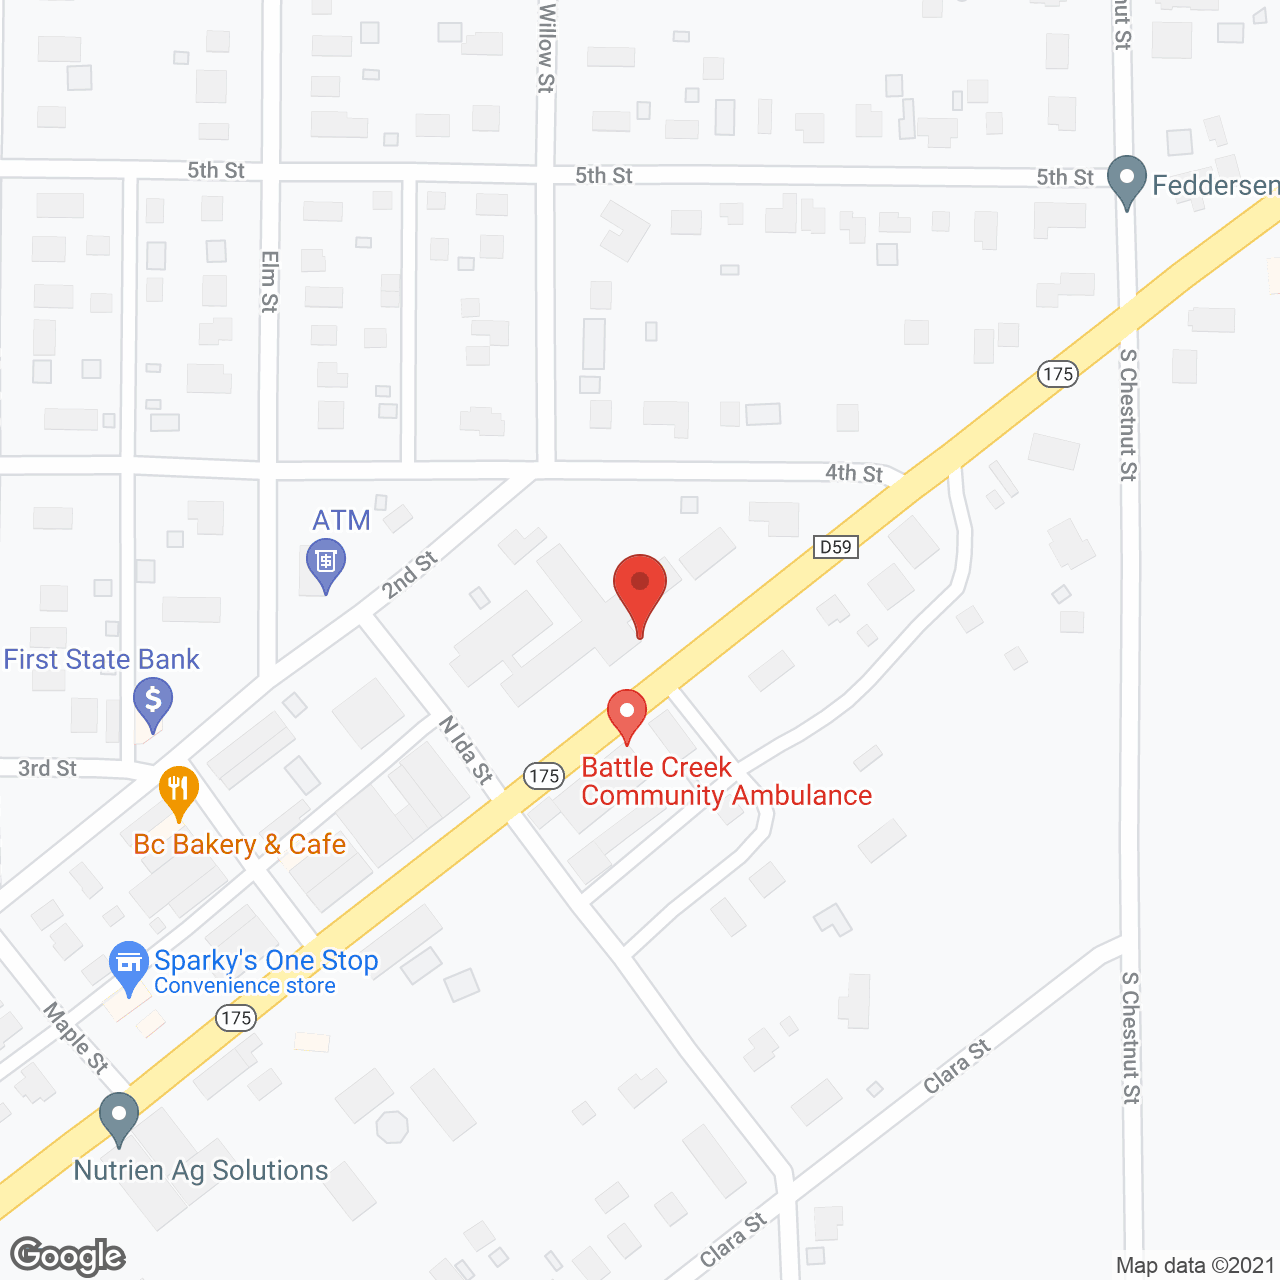 Willow Dale Wellness Village Care Center in google map